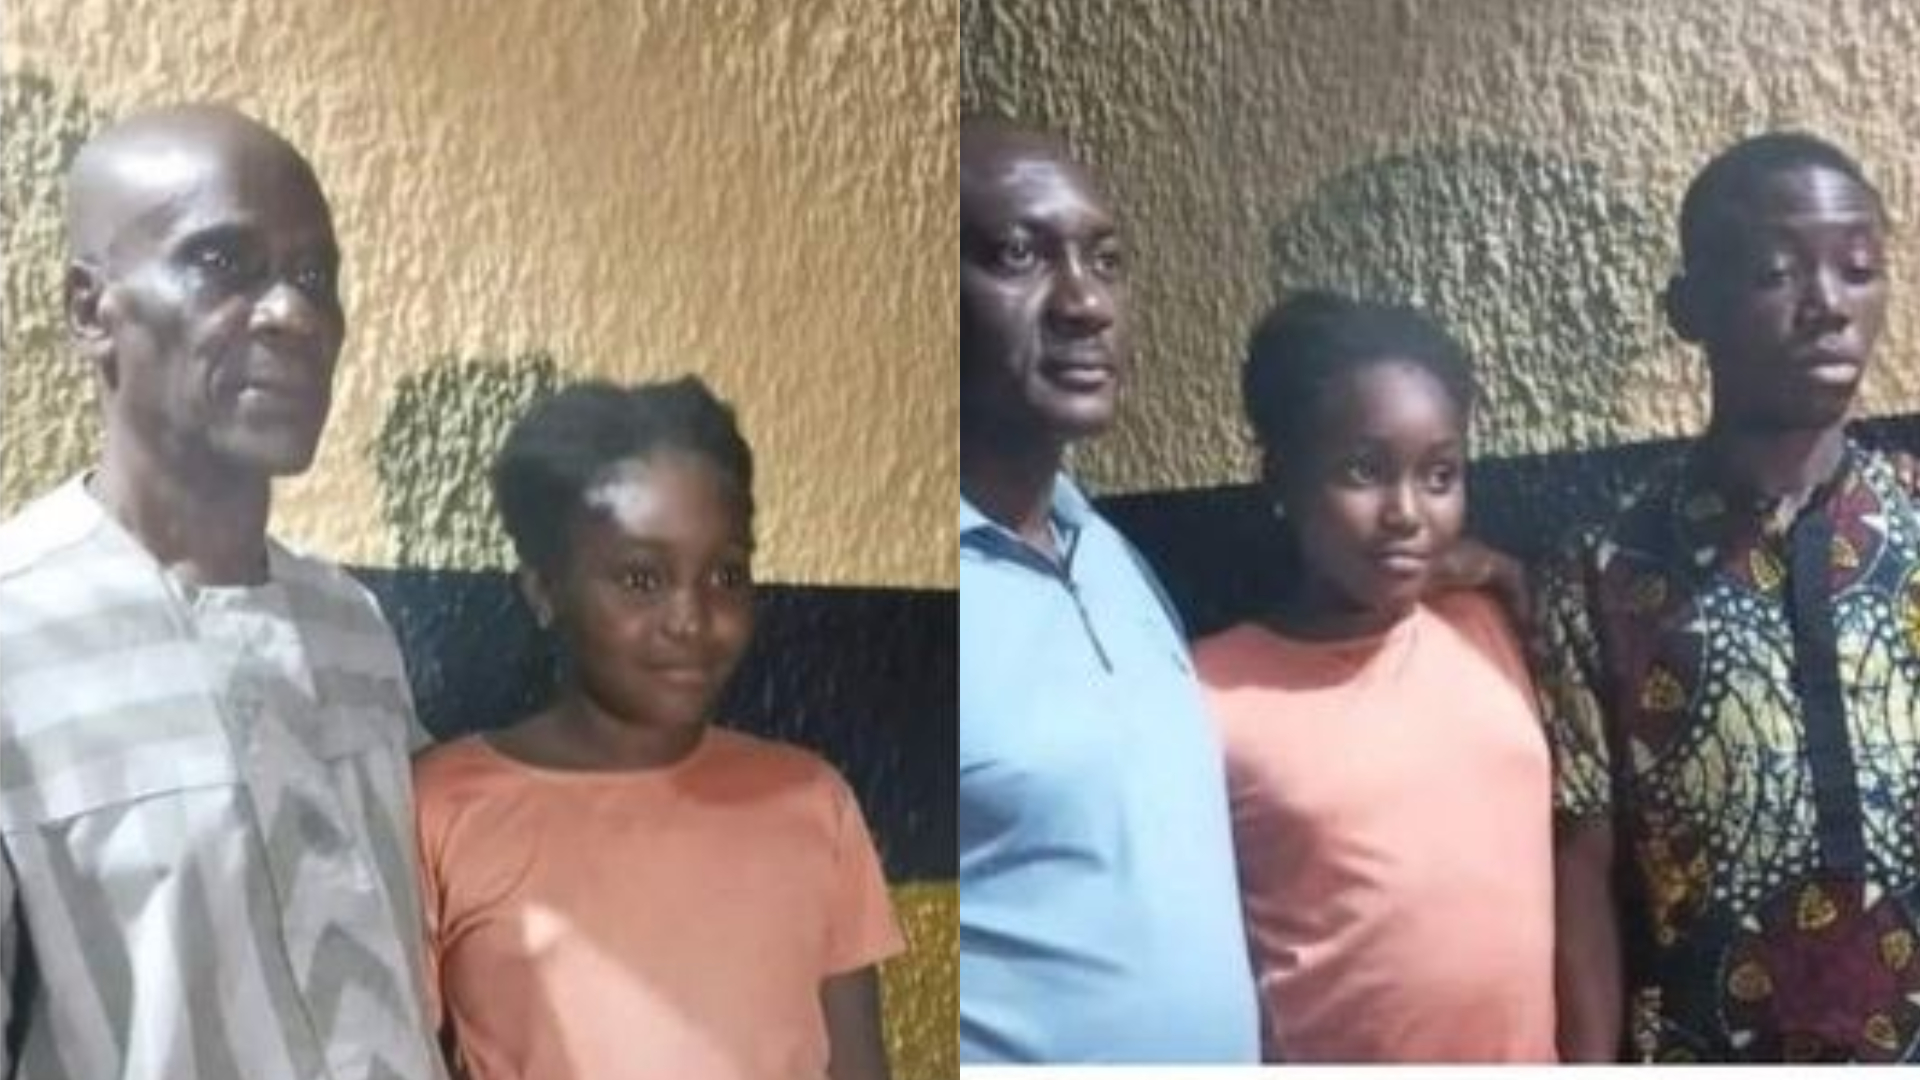 Naomi Sotonye Elijah, an 11-year-old child reported missing in Port Harcourt, Rivers State's capital, has been located.